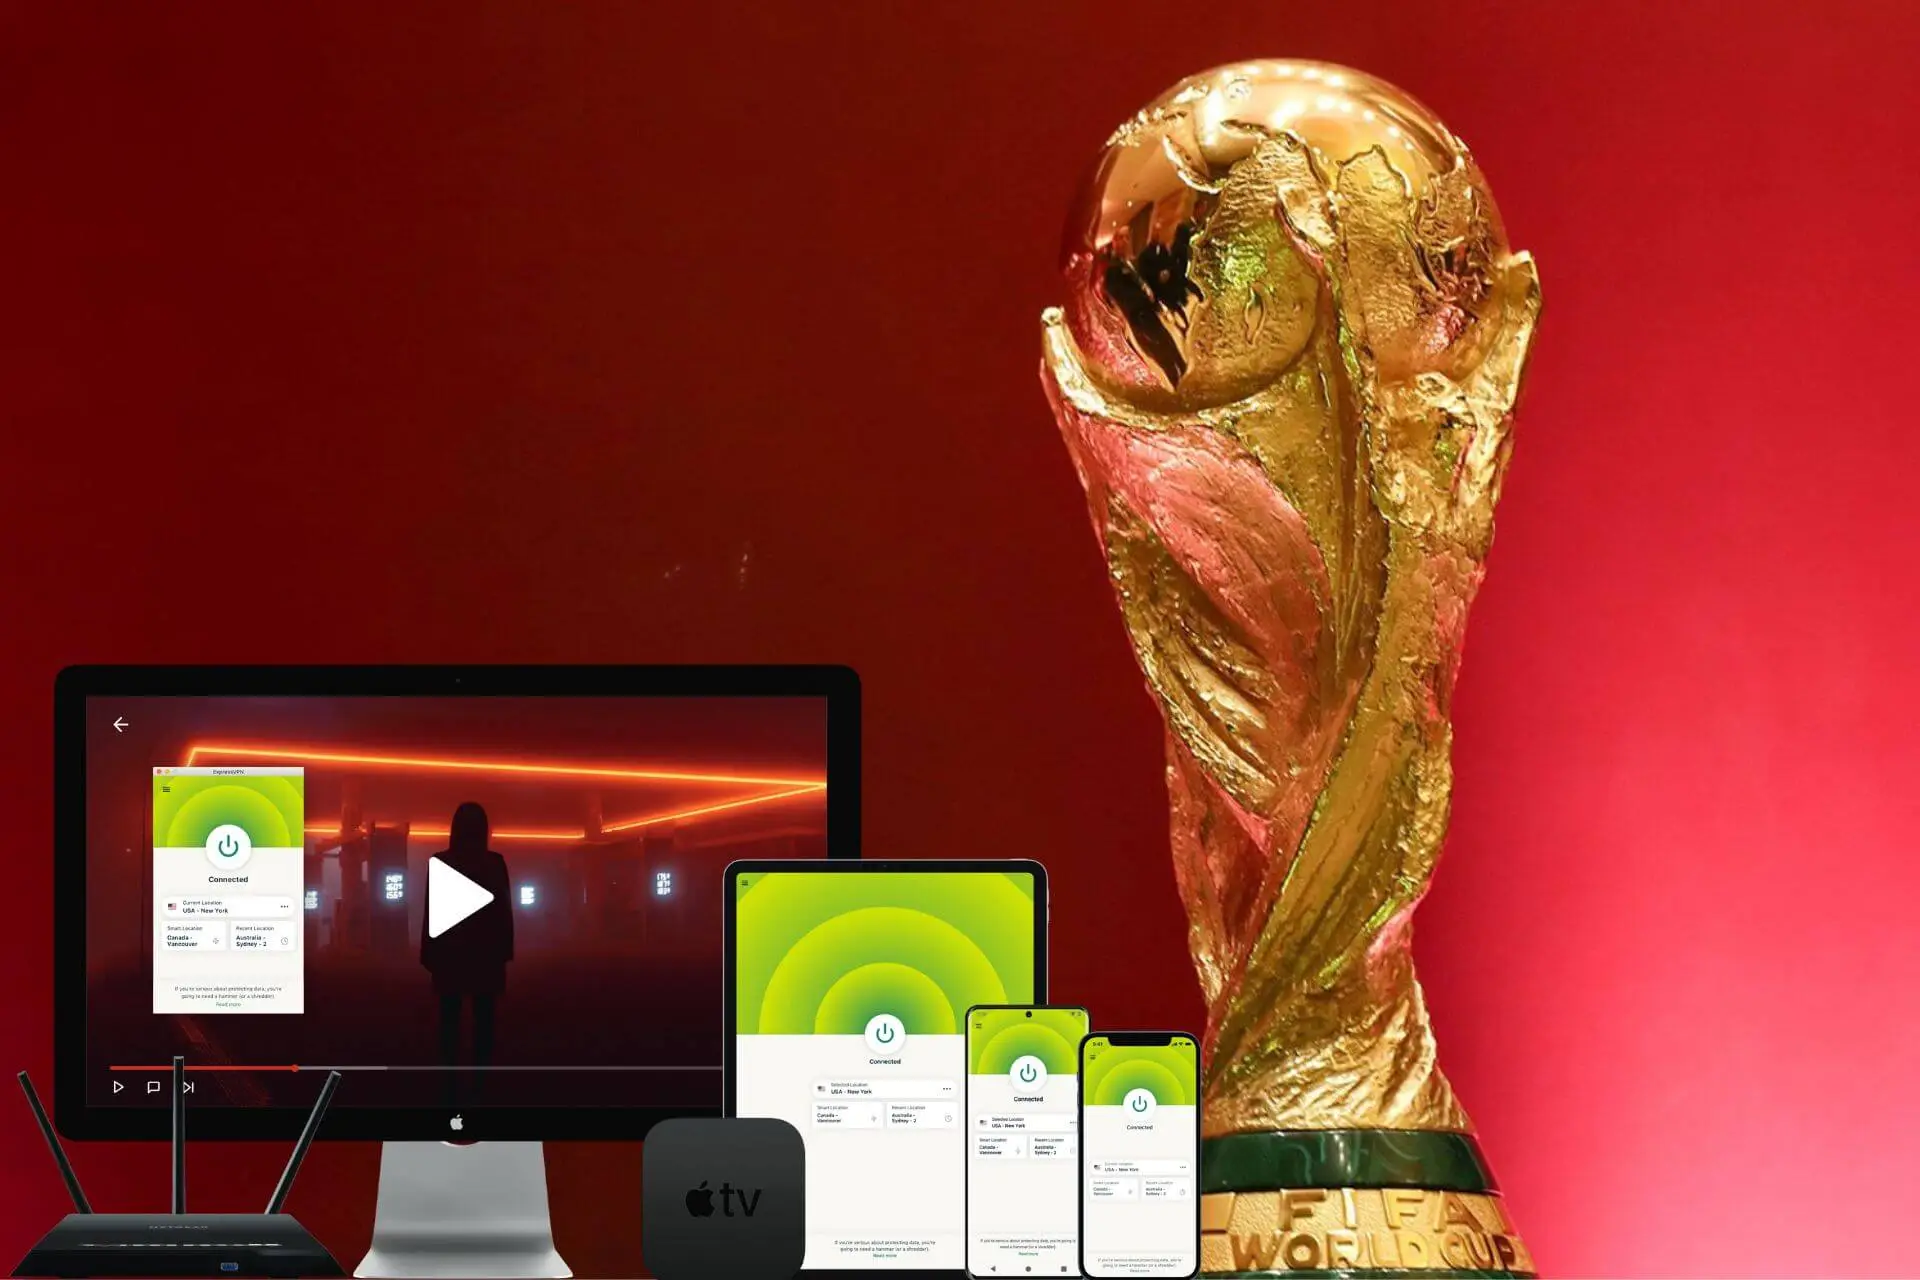 watch world cup live streaming online free